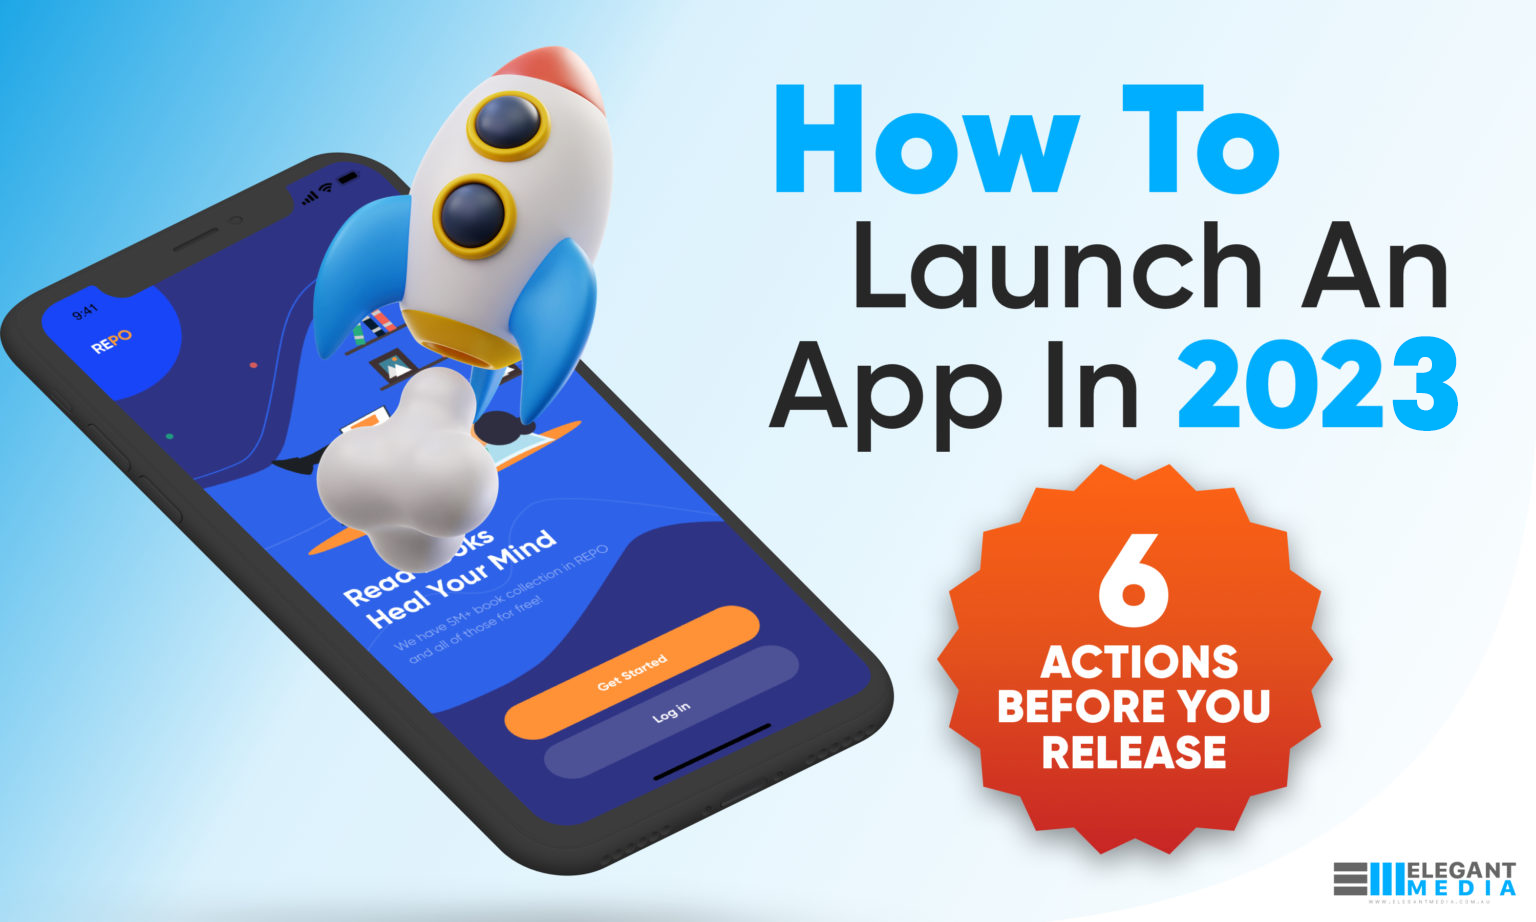 How to Launch an App - 6 Actions BEFORE you Releasew to Launch an App in 2023 - 6 Actions BEFORE you Release